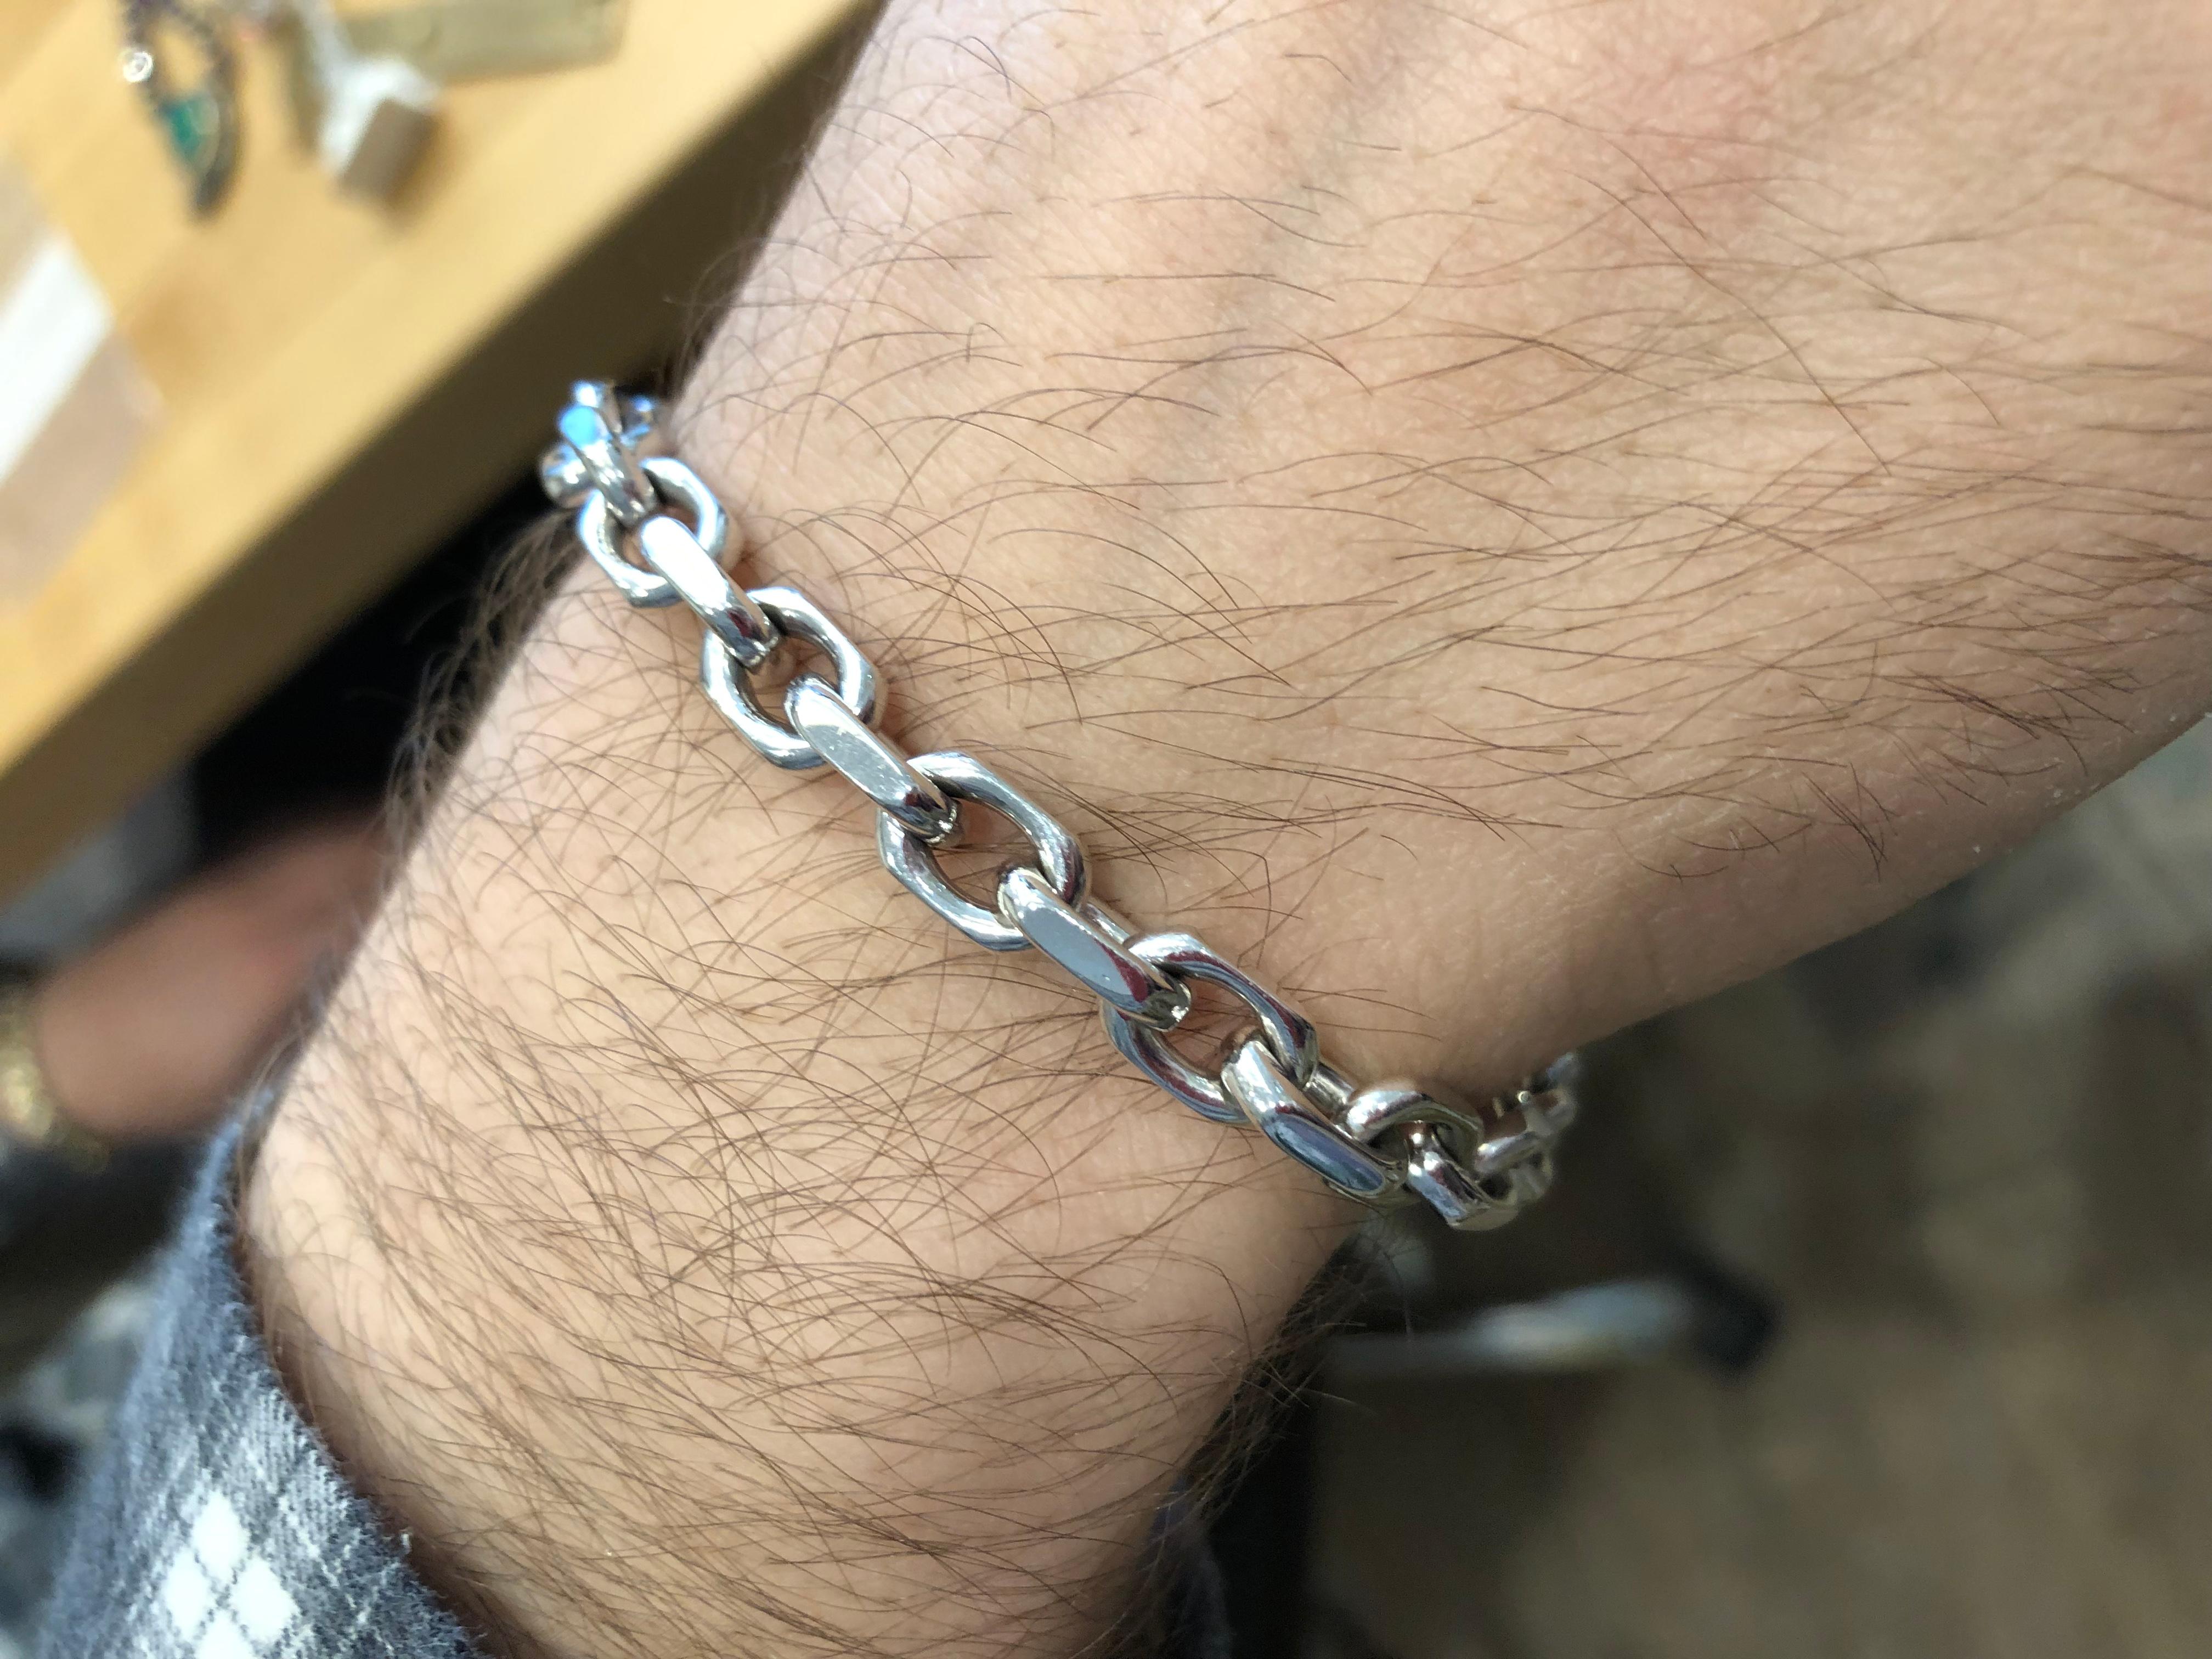 A Tiffany & Co. original, this 18K white gold link bracelet will stand up to the test of time and keep your wrist company for years to come. A great gift that can be worn everyday. 

Length: 9 ¼ inches
